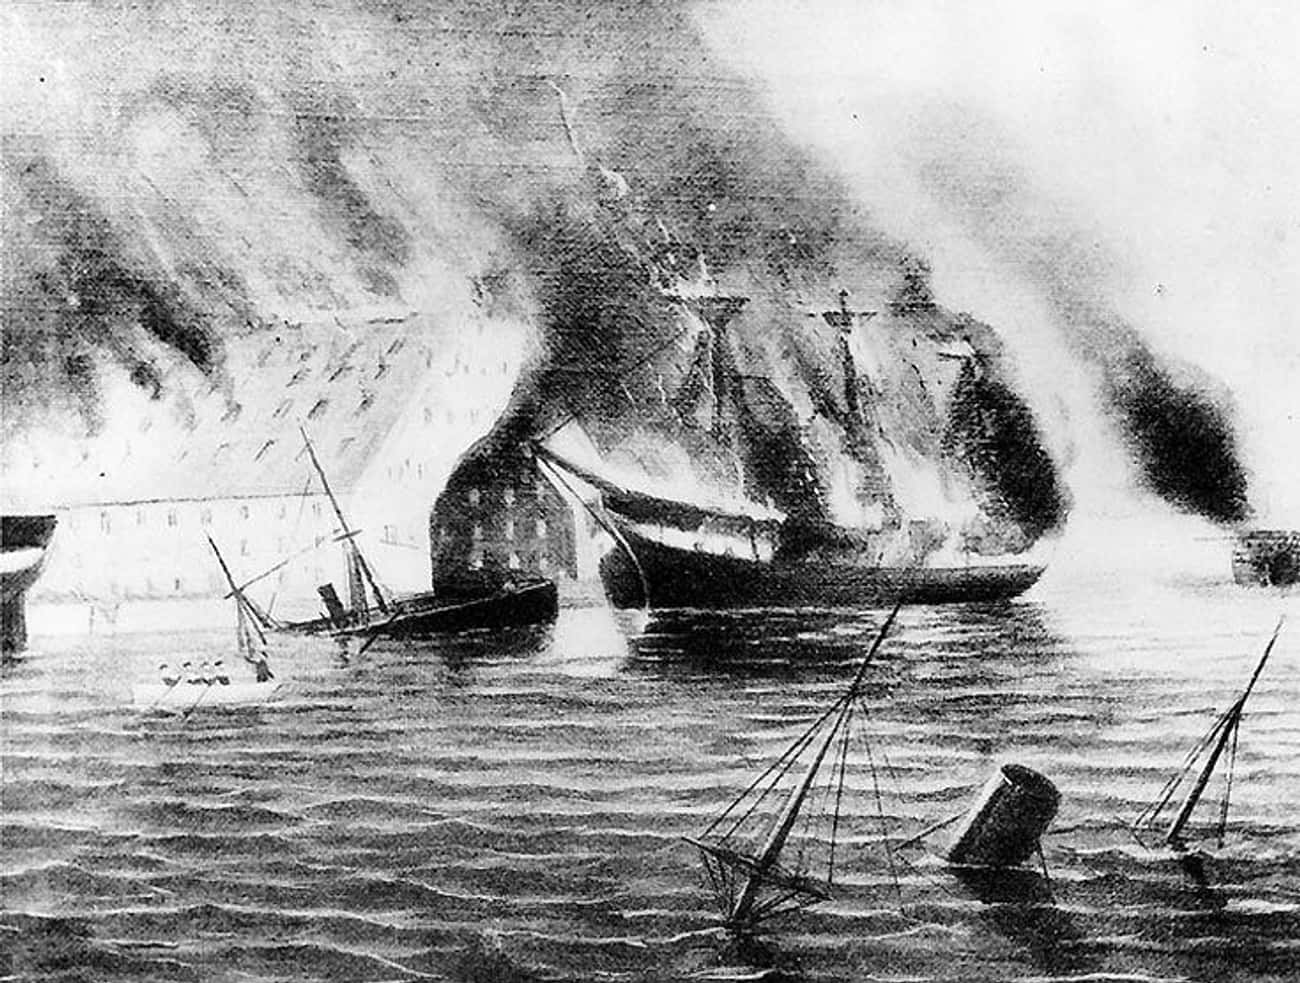 The First Verse Possibly Describes A Famous Civil War Battle Between The USS Merrimack And The USS Monitor